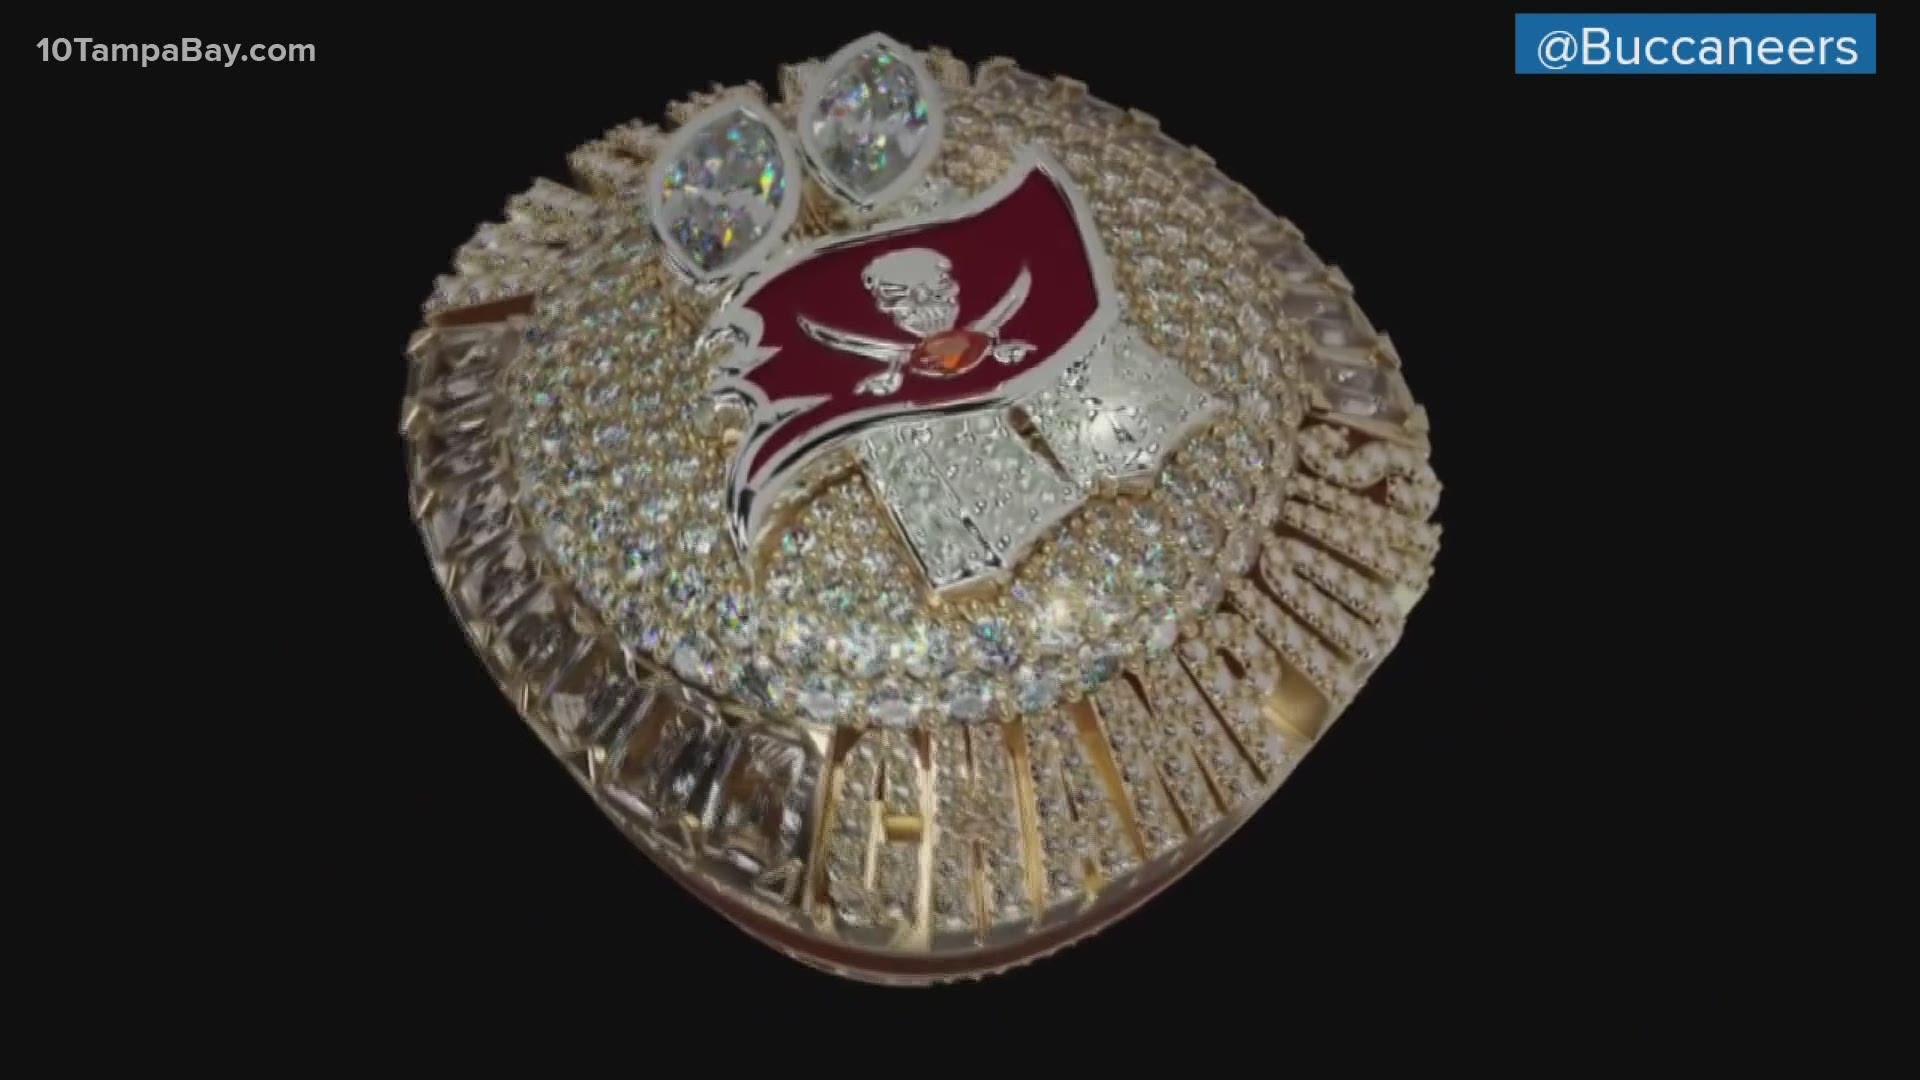 The Buccaneers put a ring on it in a private ceremony.